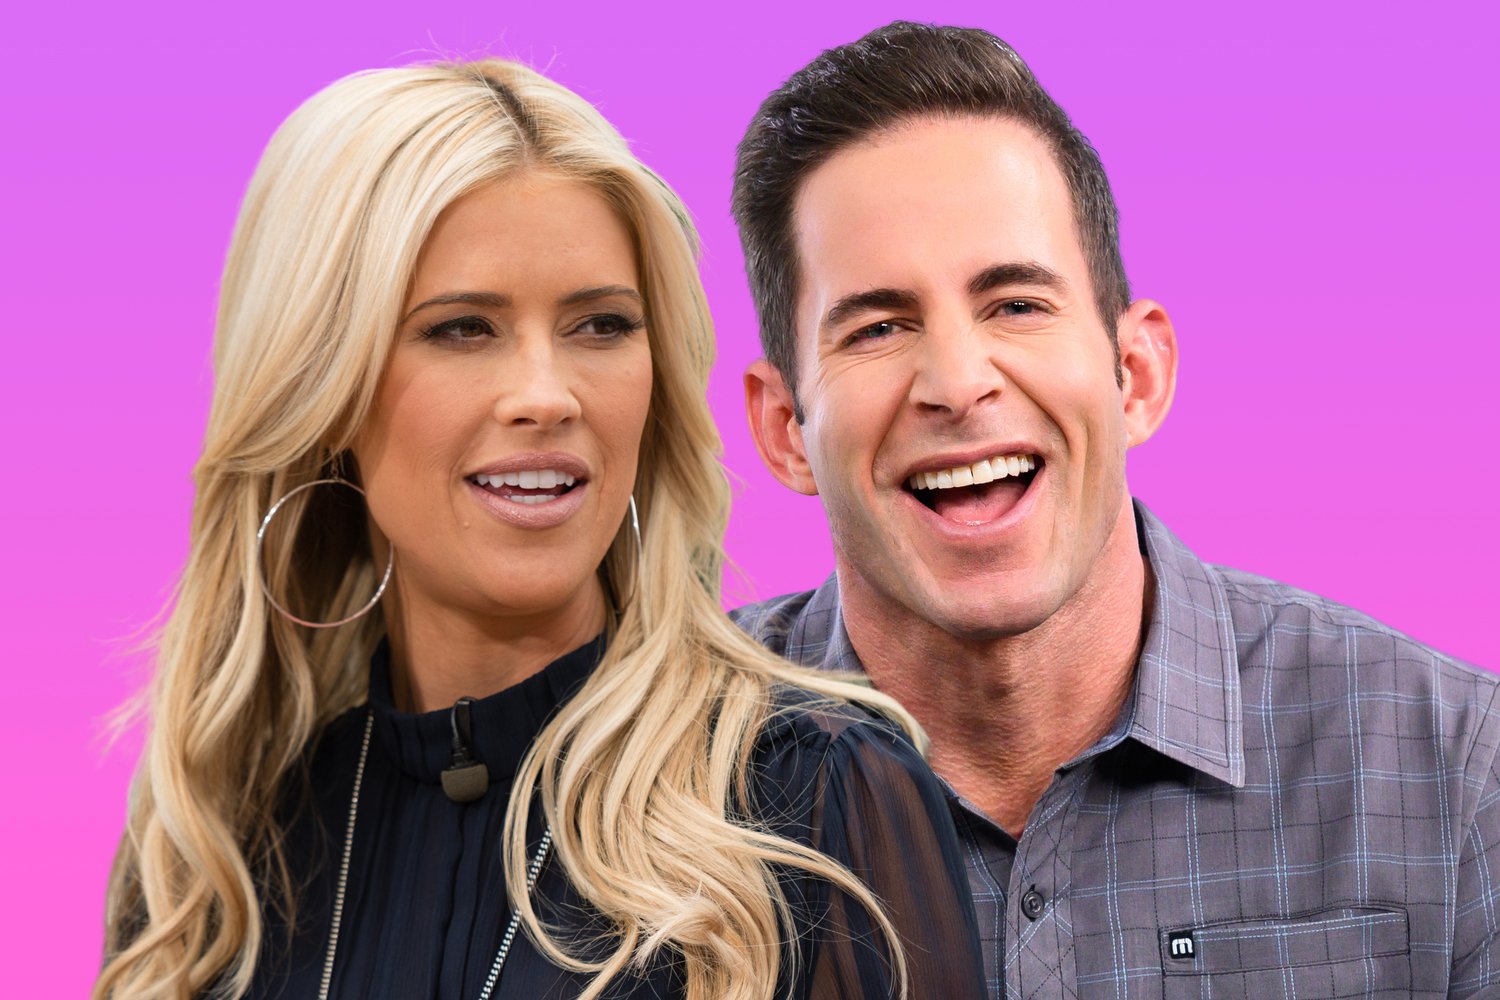 ‘Flip or Flop’ Show Was ‘Too Intimate’ for Christina Haack and Tarek El Moussa, Report